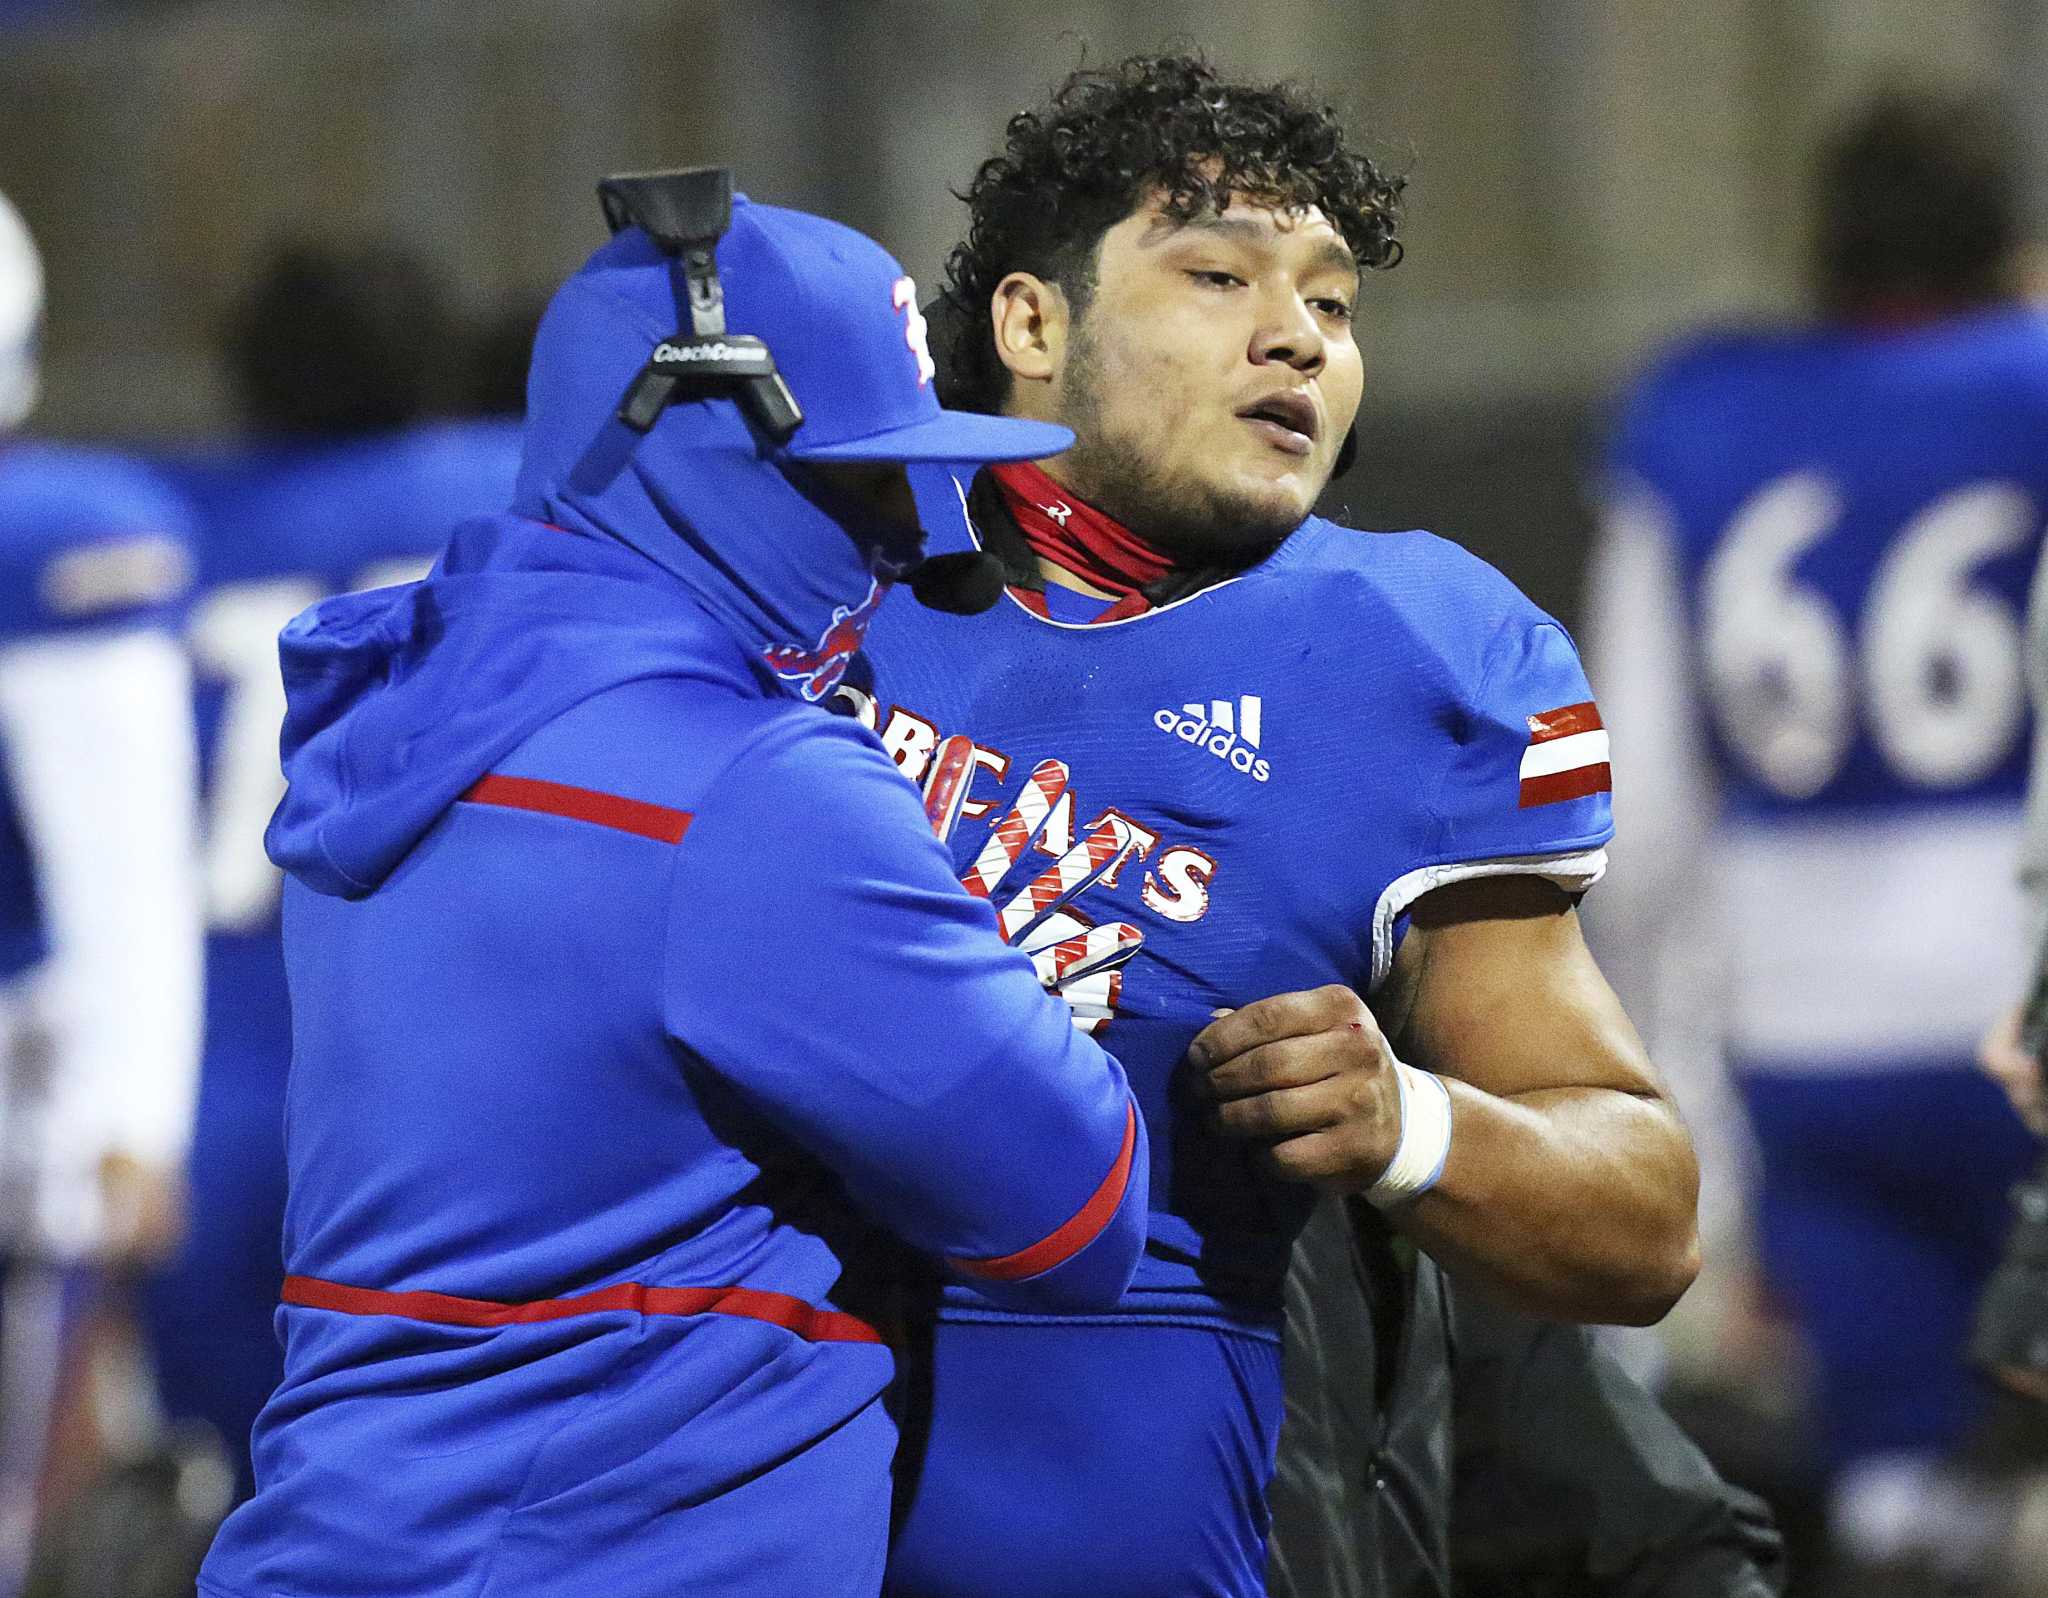 South Texas high school football player who attacked referee apologizes